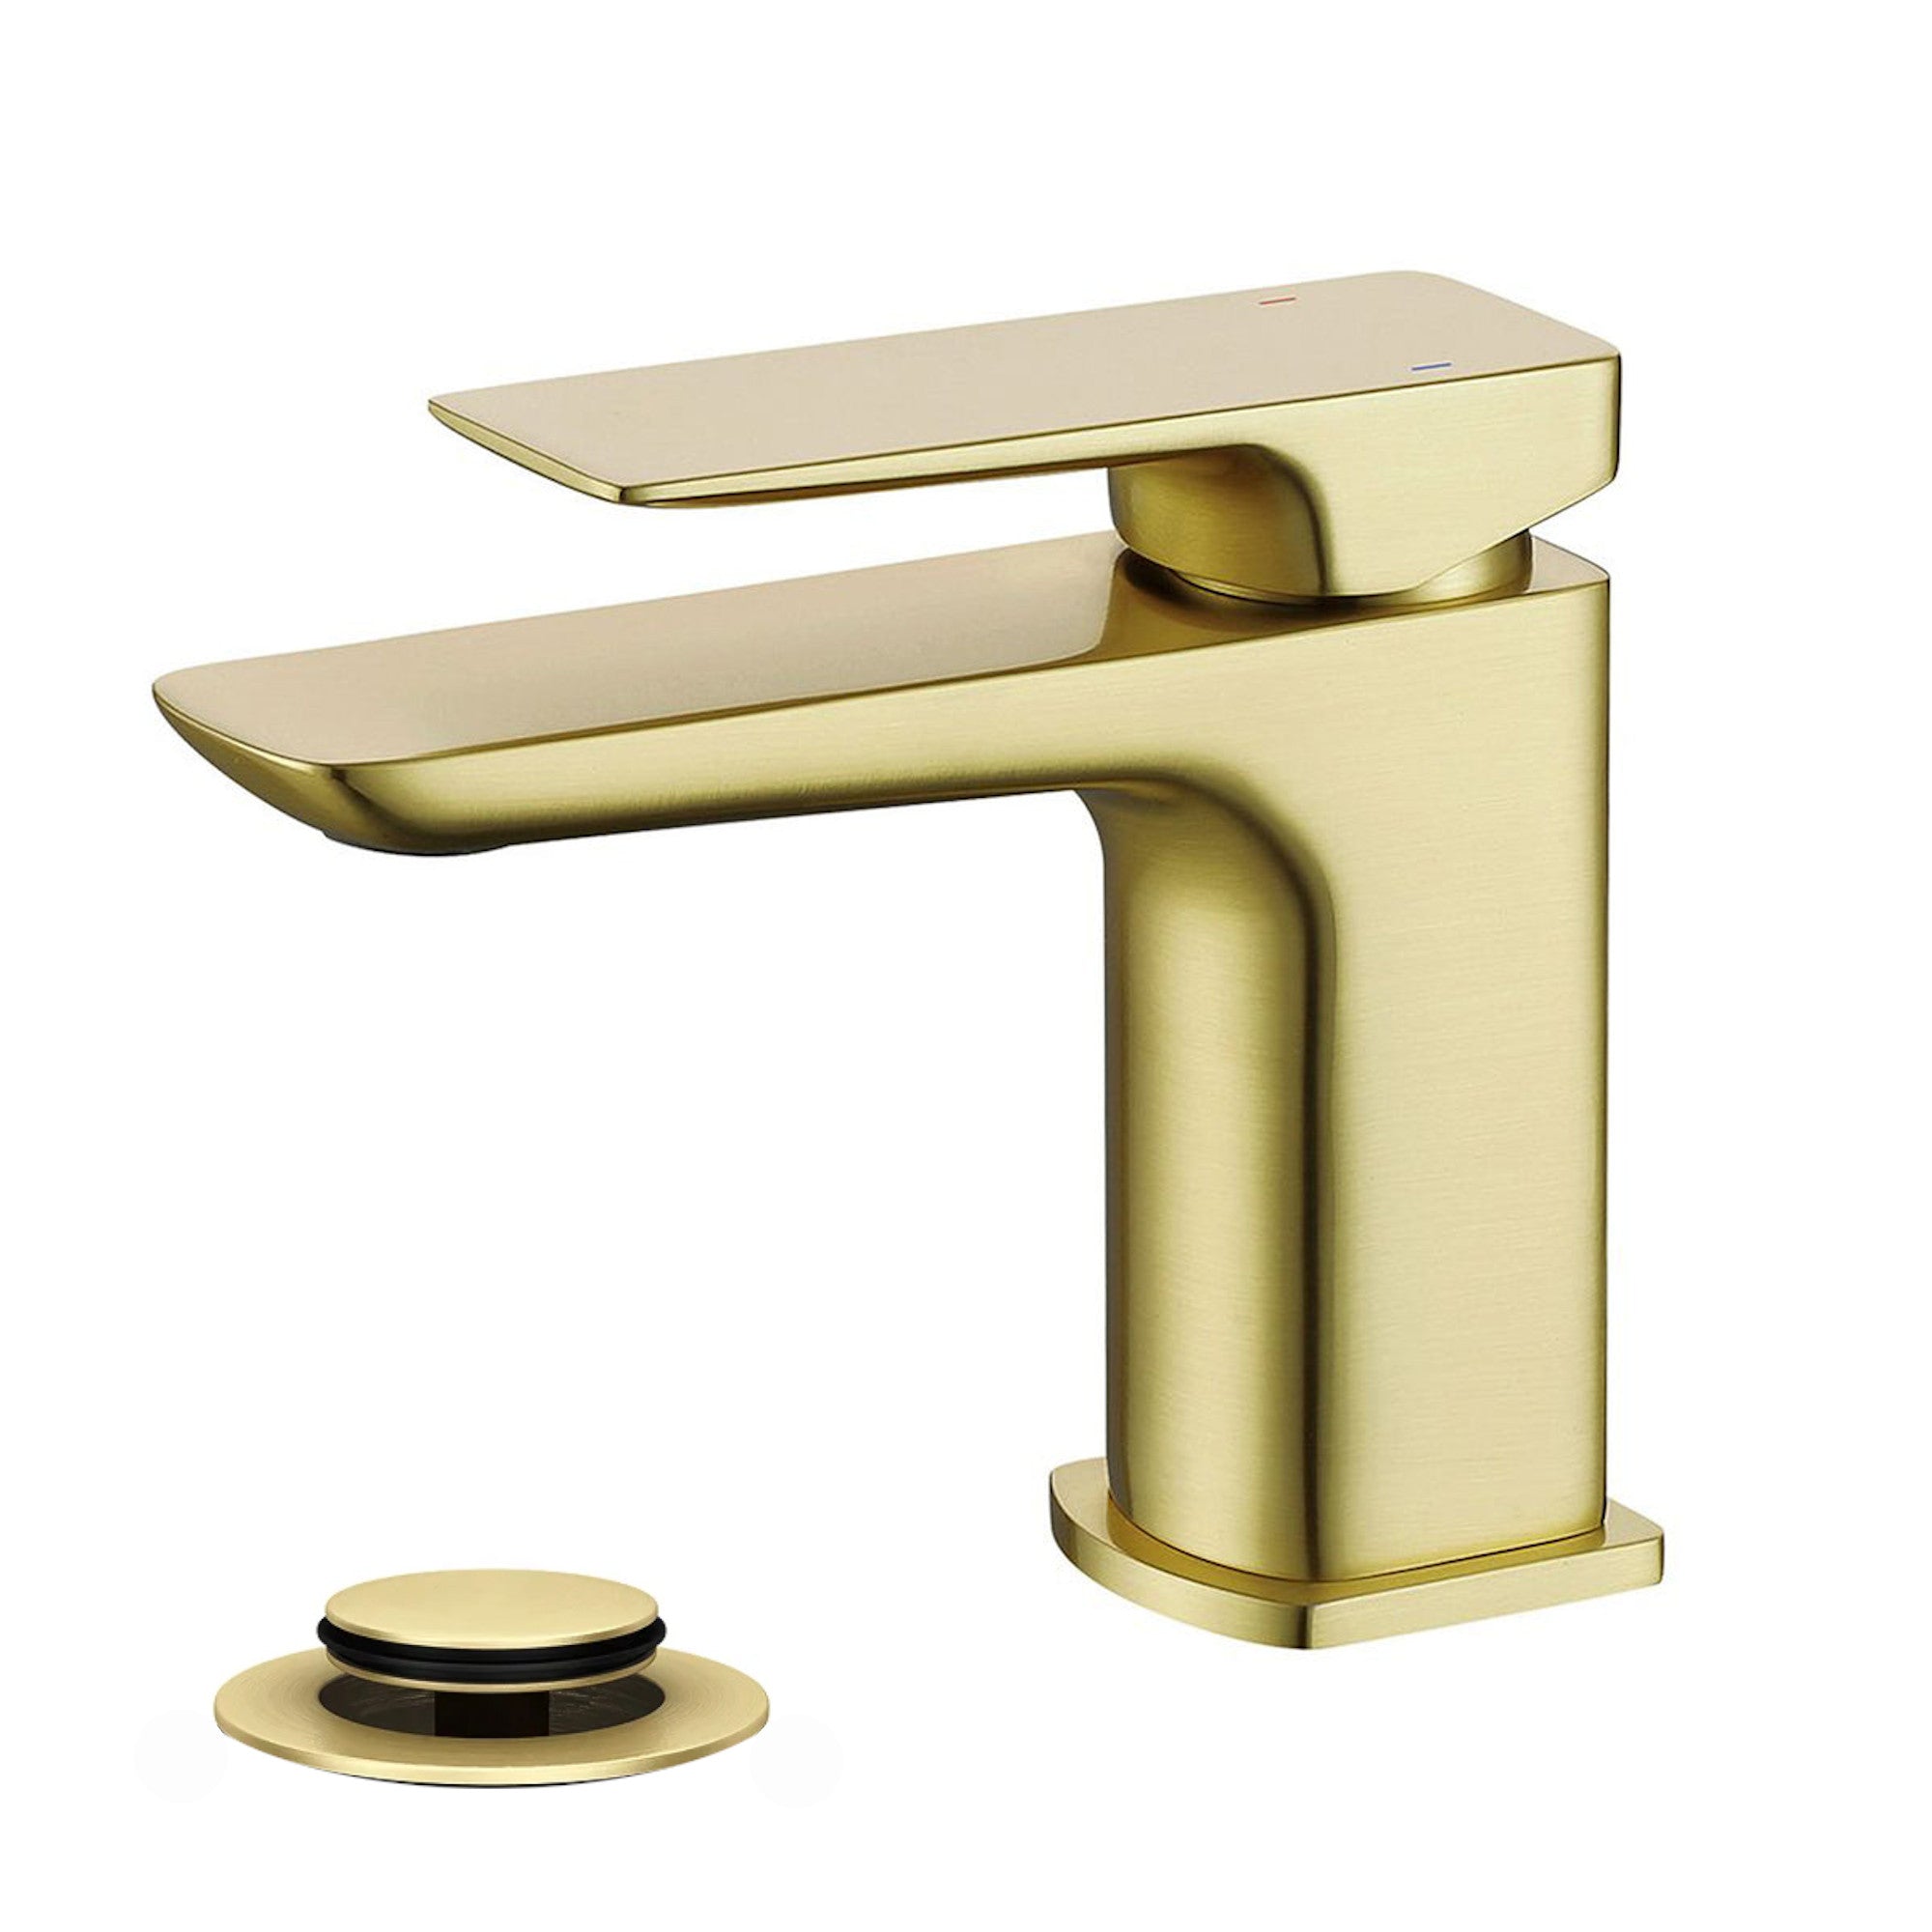 Mykonos contemporary basin sink mixer tap with waste - brushed brass